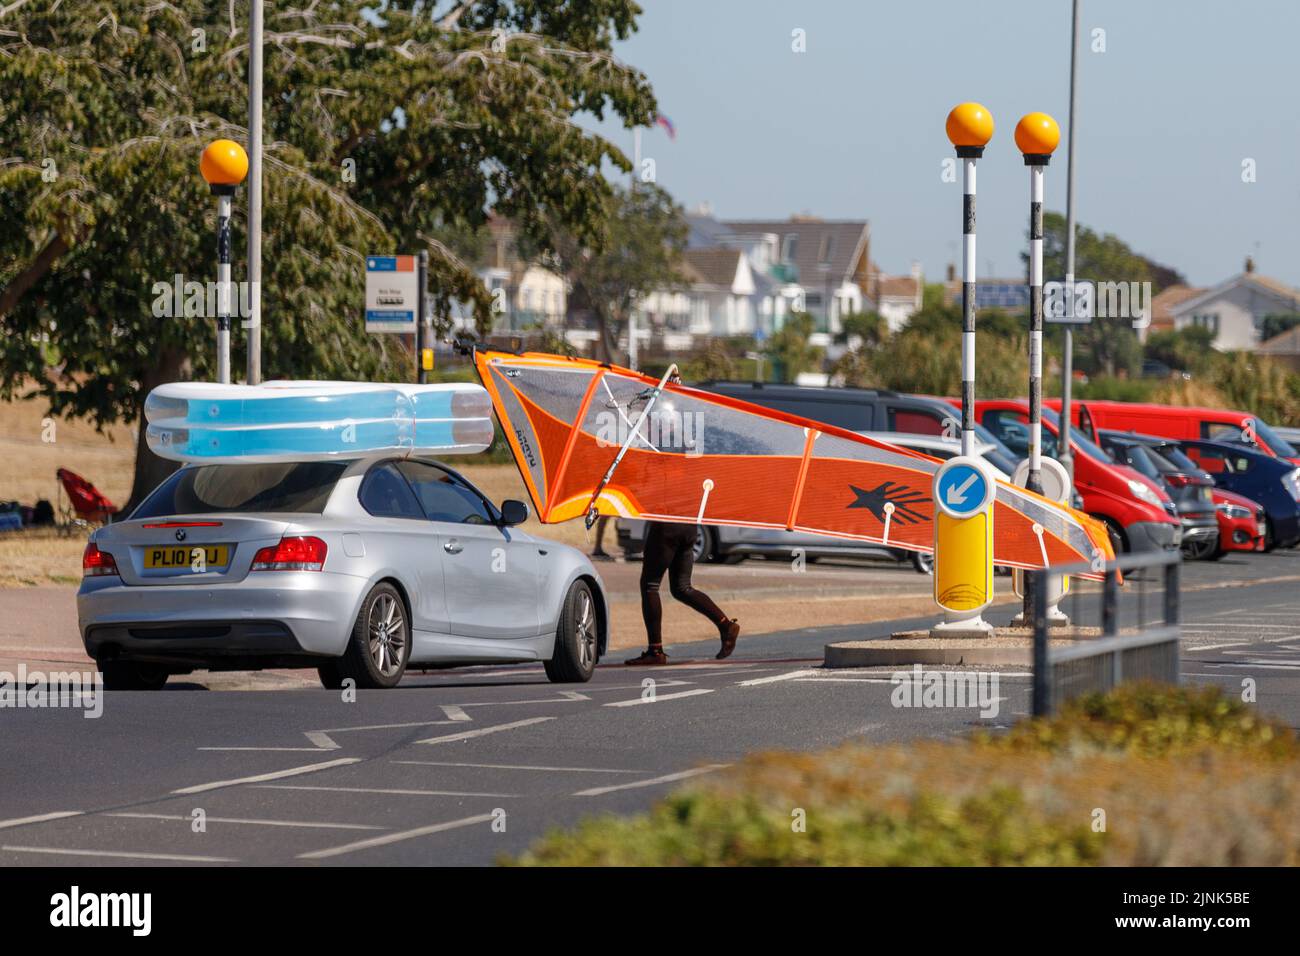 A car waits for a man holding a windsurf sail to cross the road at a pedestrian crossing on a bright sunny day Stock Photo